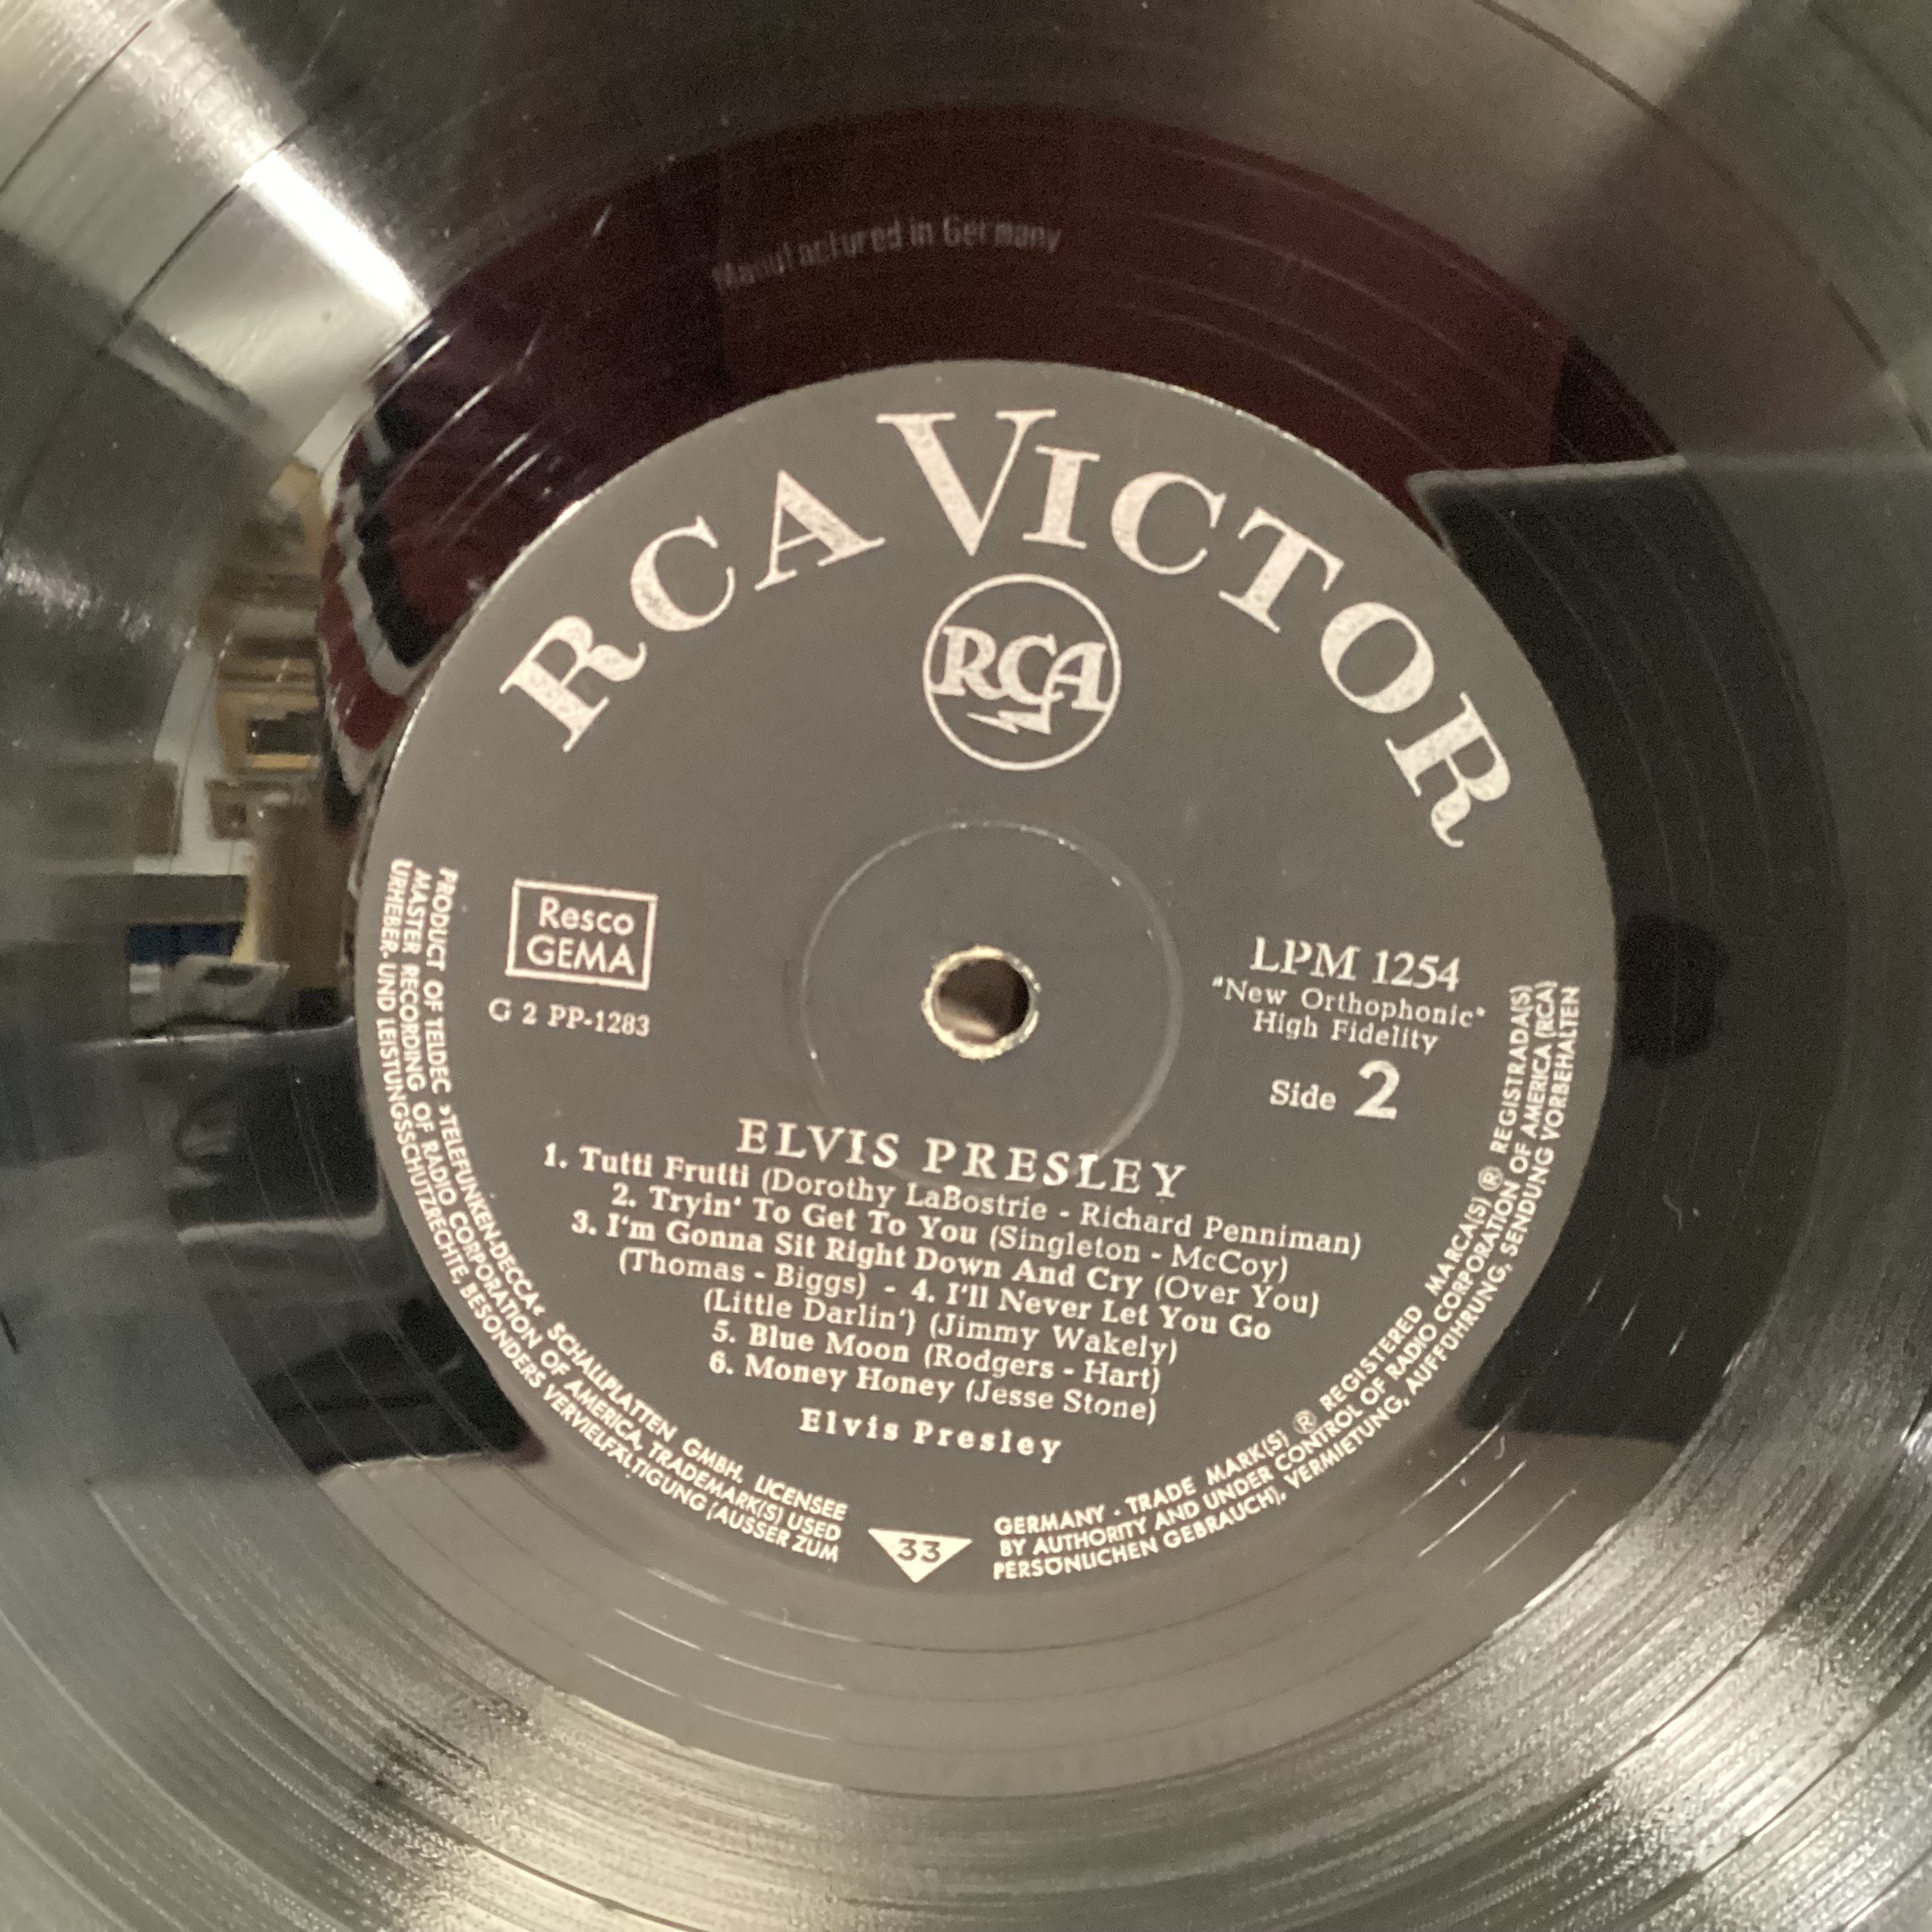 ELVIS PRESLEY DEBUT ALBUM ORIGINAL LONG PLAYER. This is a German pressing on RCA LPM 1254 found here - Image 3 of 4